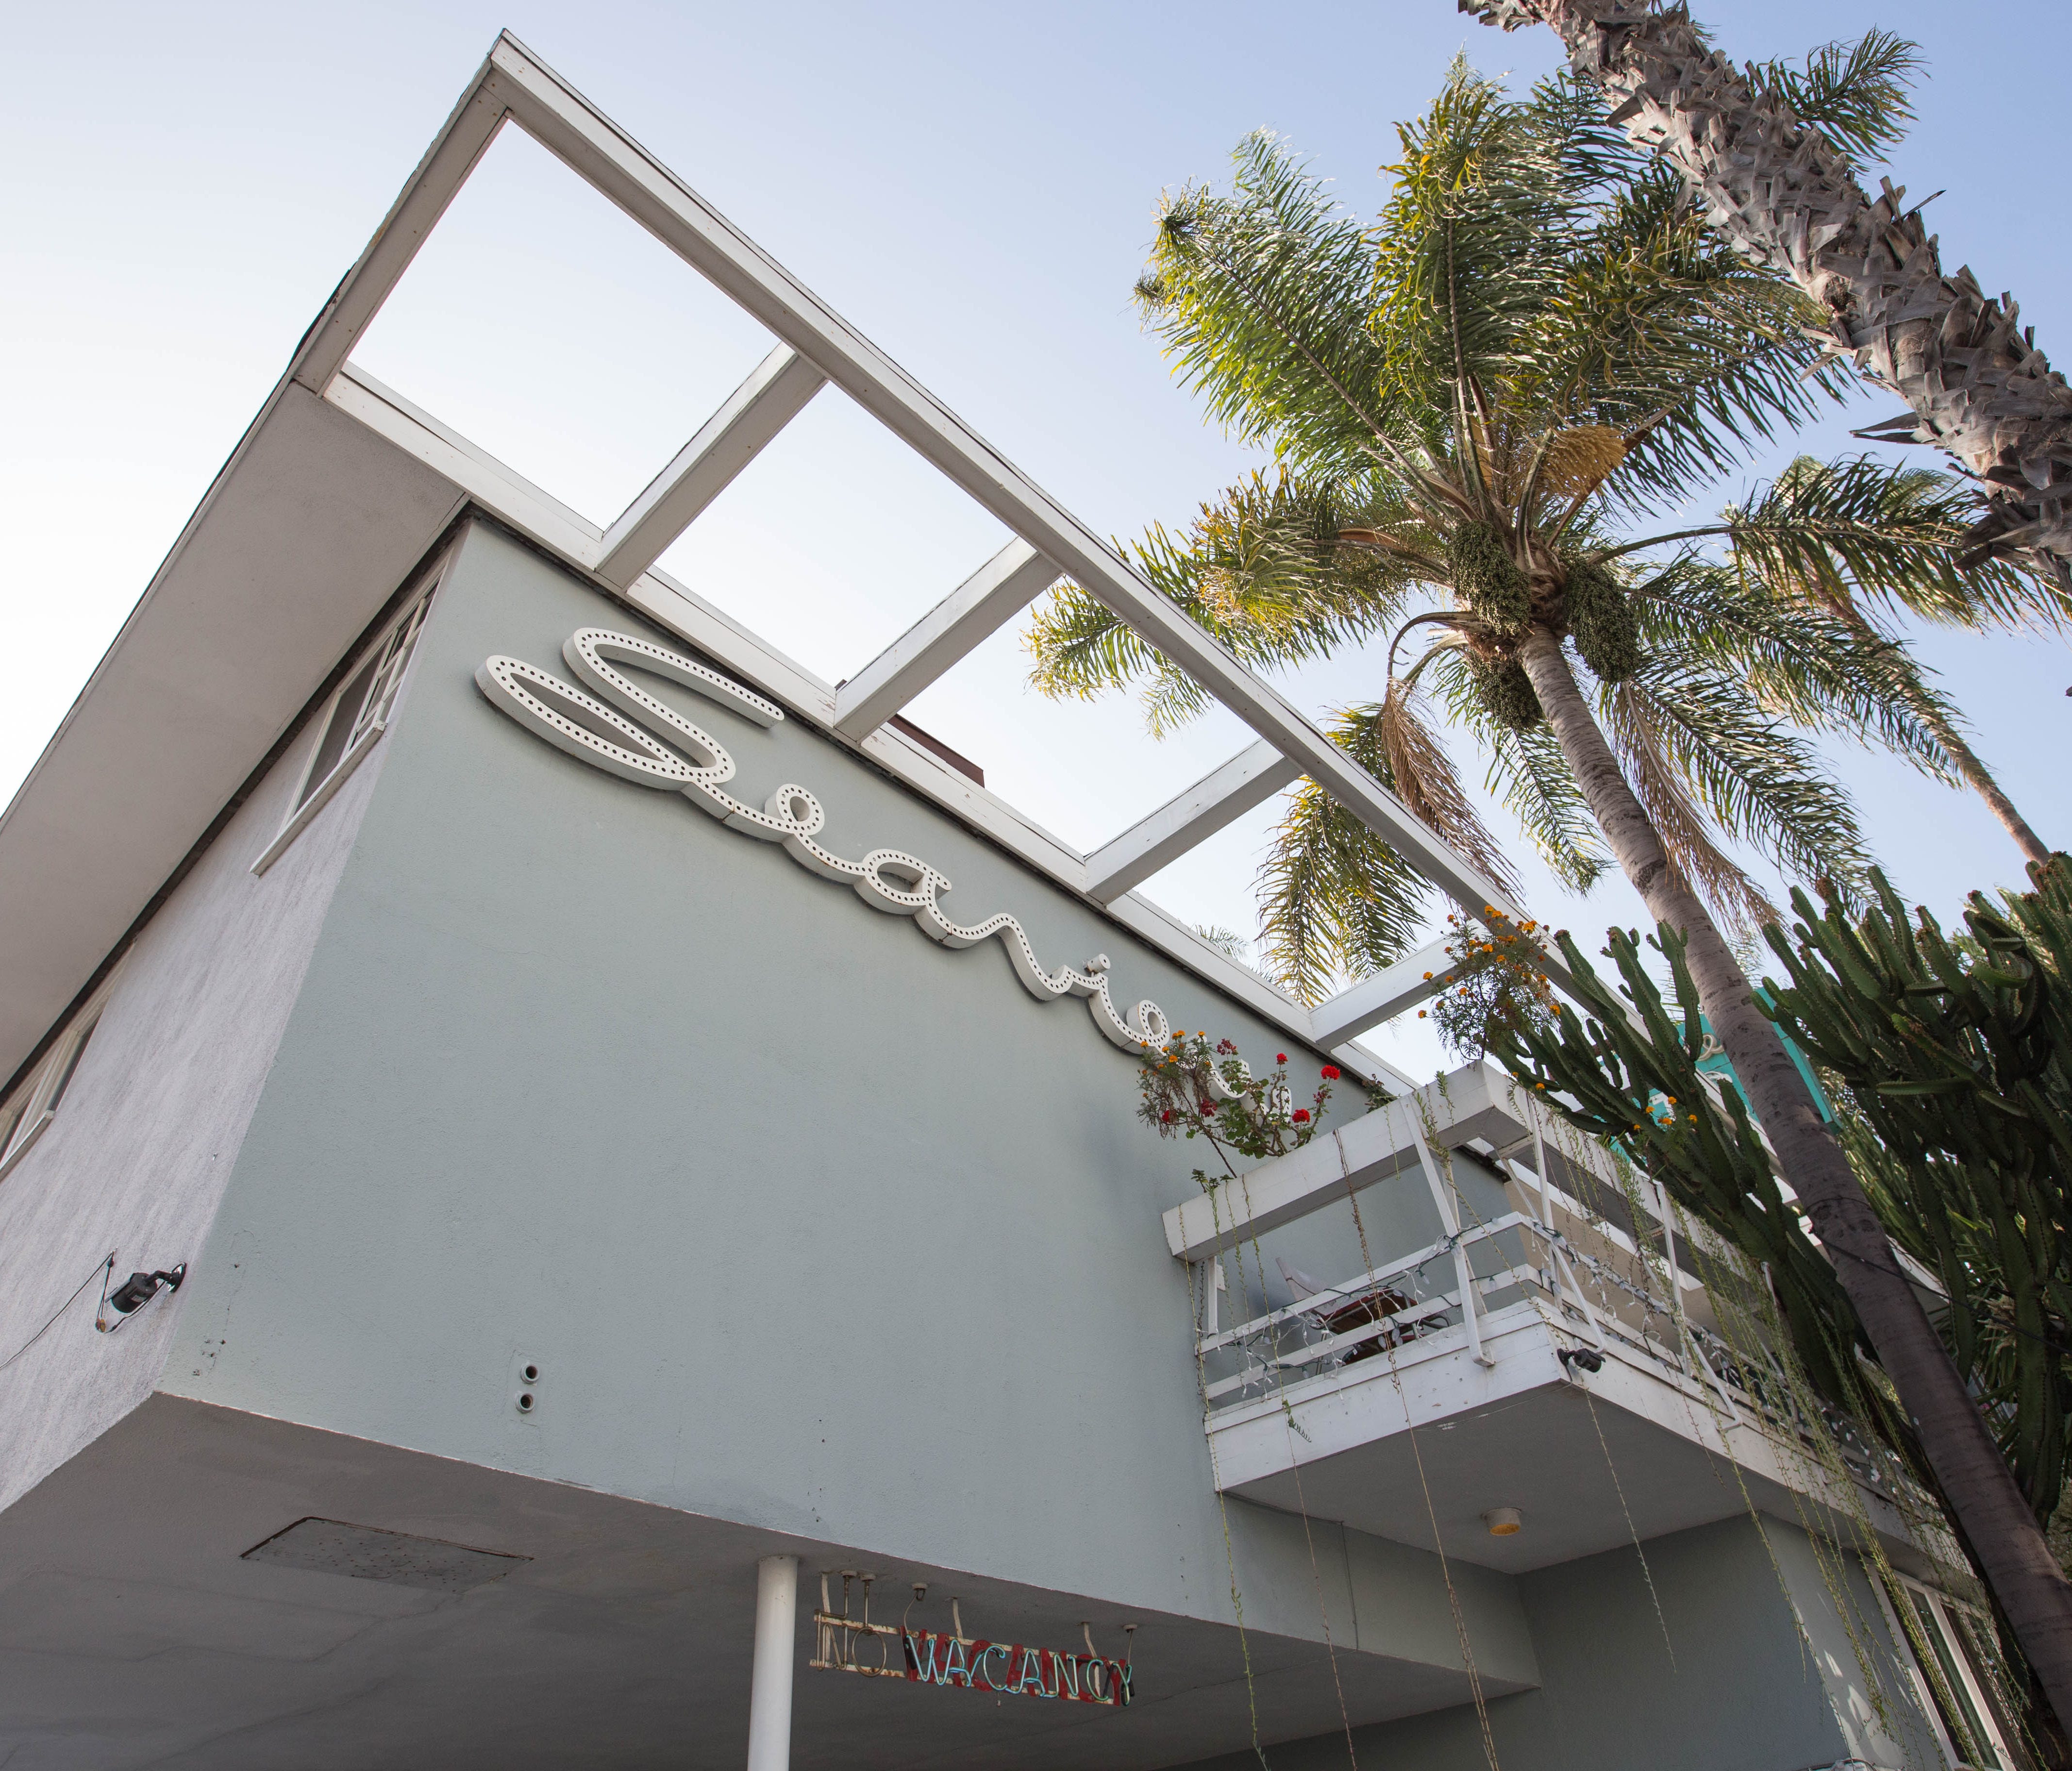 Seaview Hotel: With a prime location and palatable price tag, the Seaview Hotel offers the best of both worlds. You can spot the 1950s motor hotel, which lies a short walk from the Santa Monica Pier and the Third Street Promenade, by its two neon 